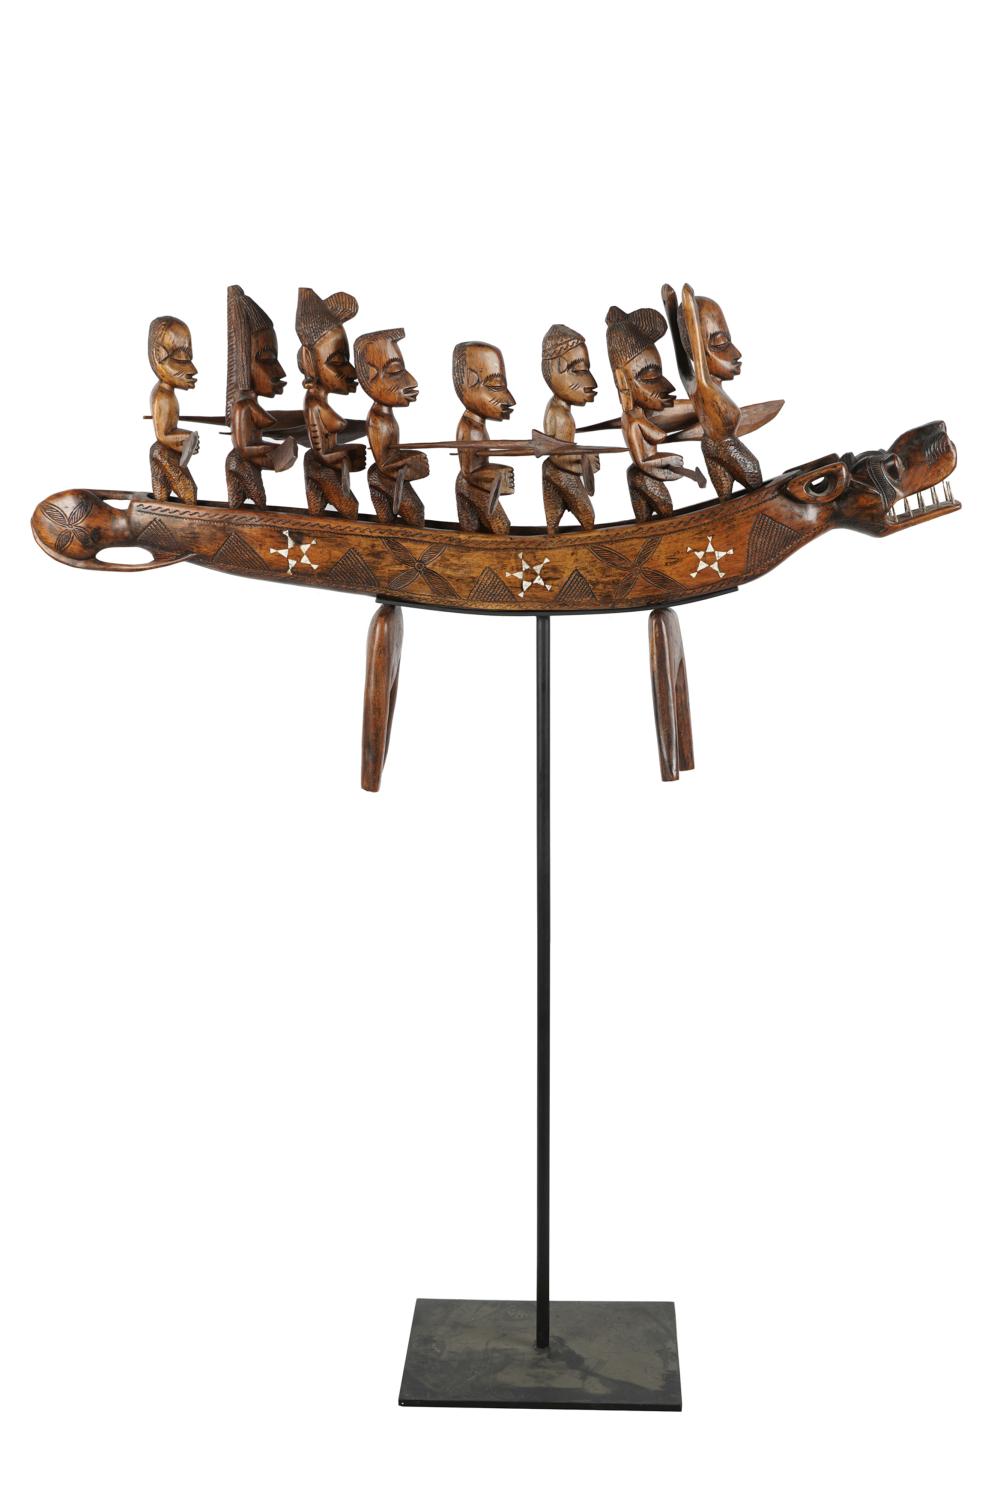 NIGERIAN INLAID WOOD BOAT CARVINGthe 333568